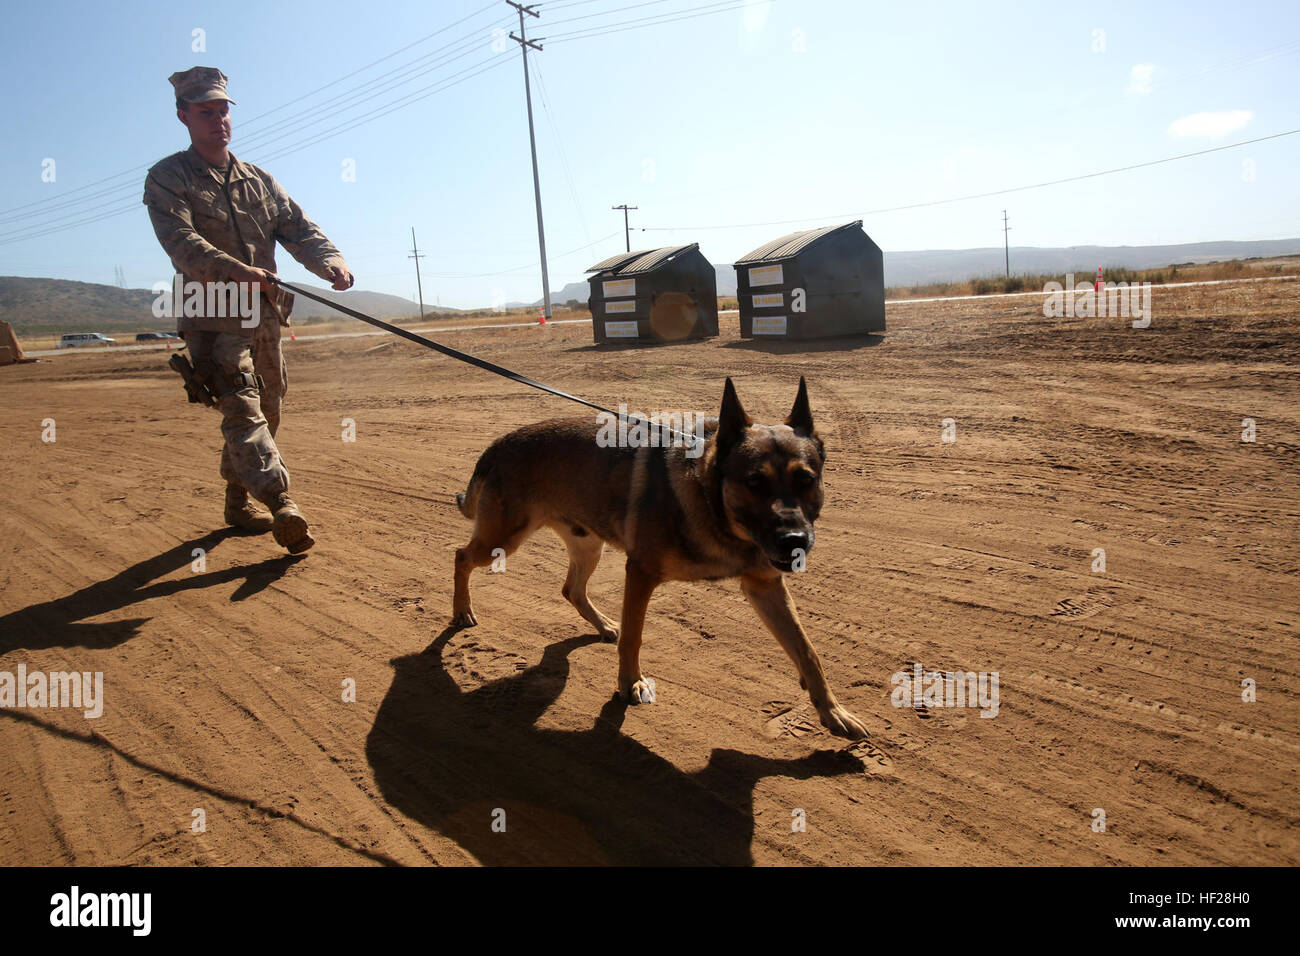 Lance Cpl. James Story, a military working dog handler with 1st Law Enforcement Battalion, I Marine Expeditionary Force, walks with his dog Denny during the 2014 I Marine Expeditionary Brigade command post exercise aboard Camp Pendleton, Calif., June 19, 2014. Story and Denny provided security at the front gate of the camp during the exercise. (U.S. Marine Corps photo by Lance Cpl. David Silvano/released) BHG ensures mission accomplishment for CPX3 140619-M-vz999-116 Stock Photo